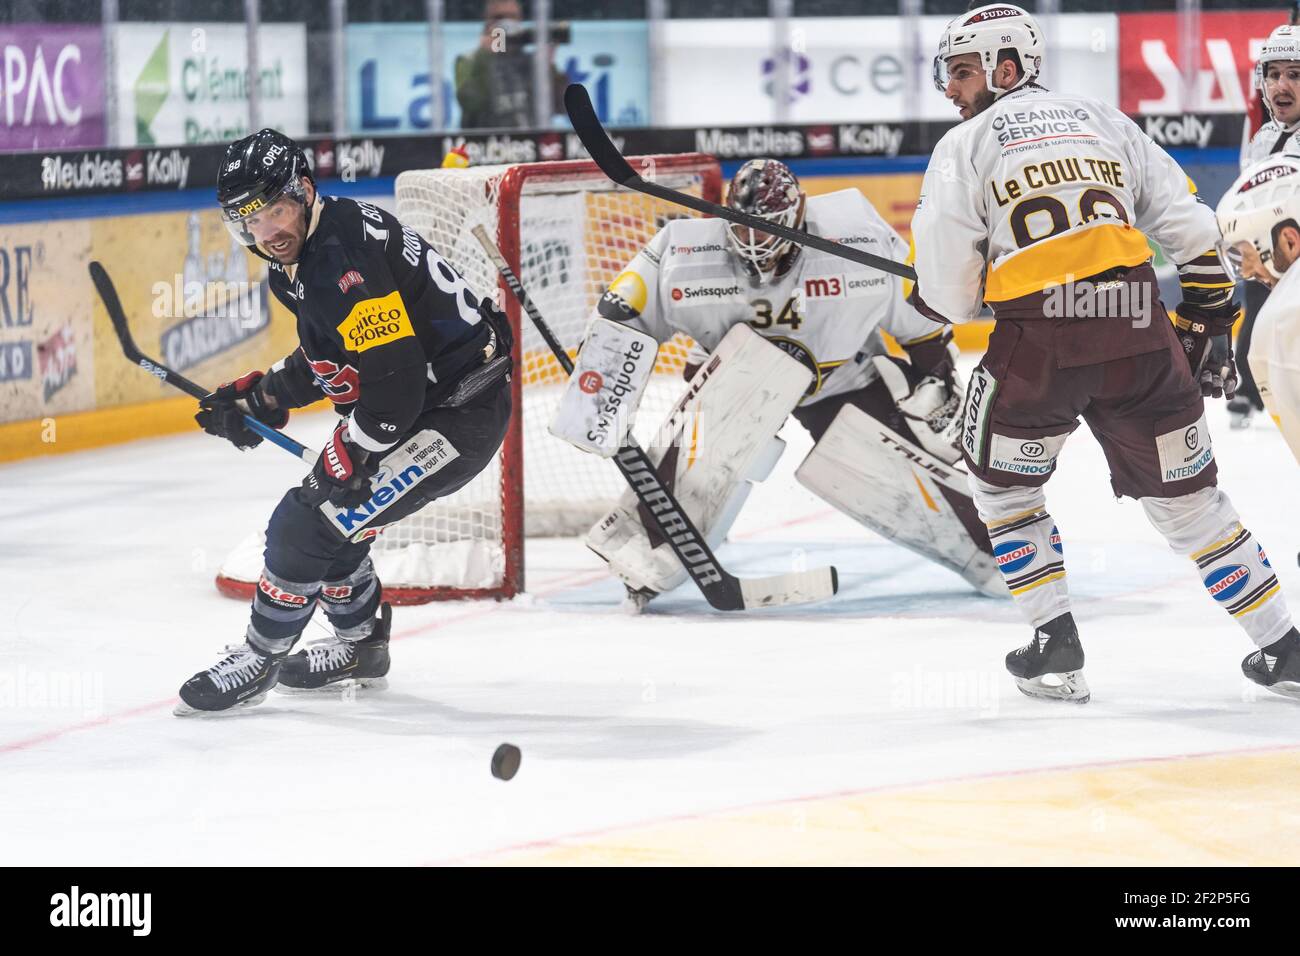 Friborg, Friborg. 12th Mar, 2021. March 12th, 2021, Friborg, BCF Arena, National League: Friborg-Gotteron - Geneve-Servette HC, # 88 Christopher DiDomenico (Friborg) looks at the puck in the background # 90 Simon Le Coultre (Geneva) (Switzerland/Croatia OUT) Credit: SPP Sport Press Photo. /Alamy Live News Stock Photo